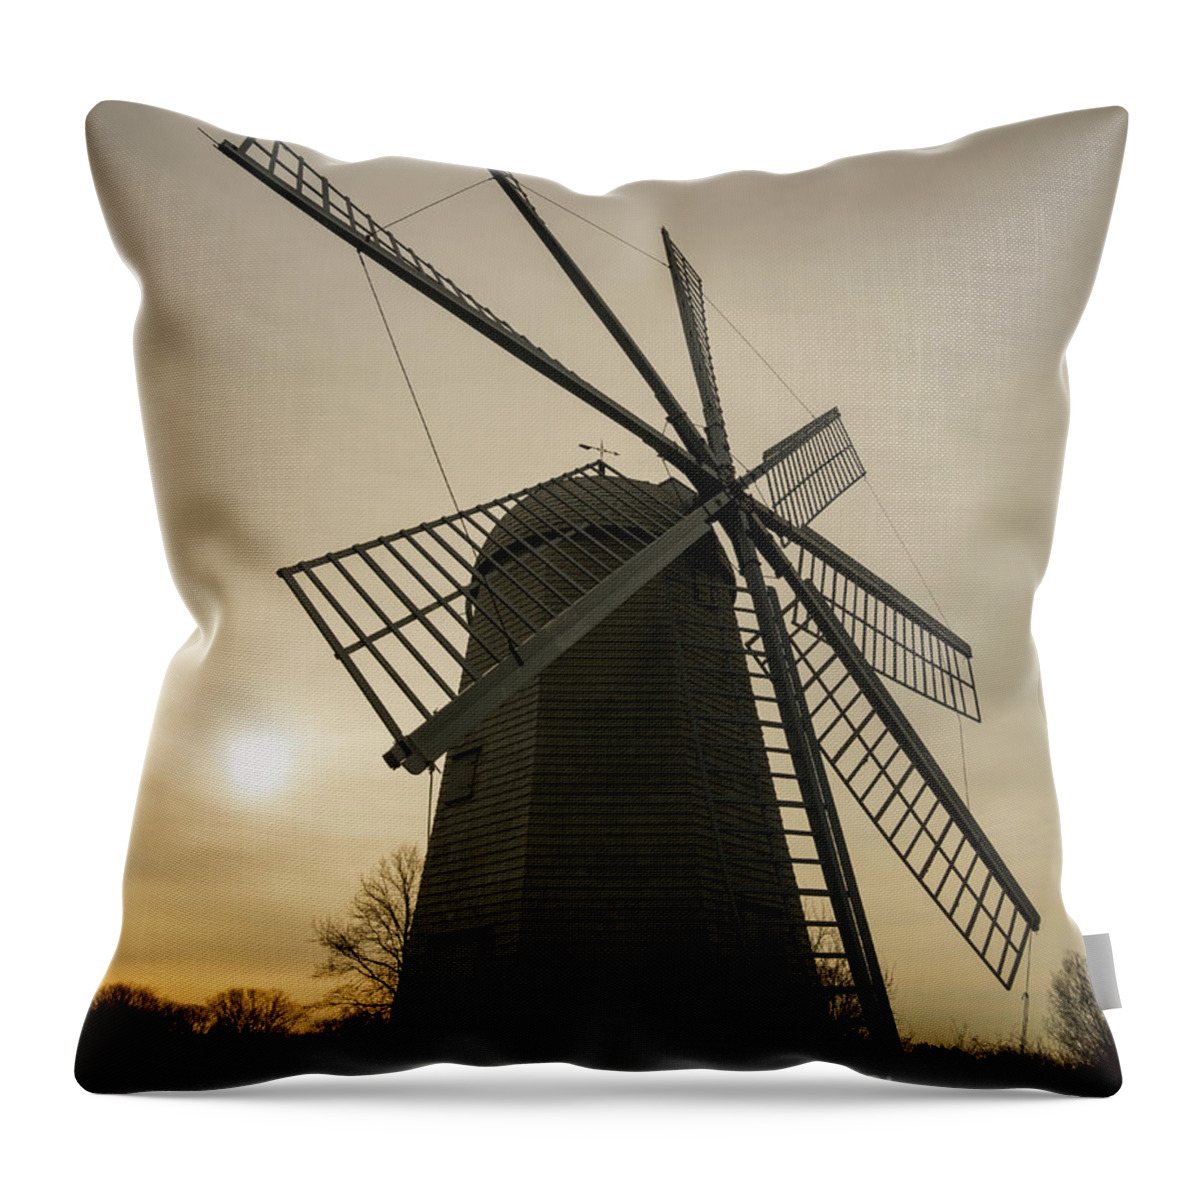 Middletown Throw Pillow featuring the photograph Boyds Old Smock Mill - Rhode Island Windmill by JG Coleman